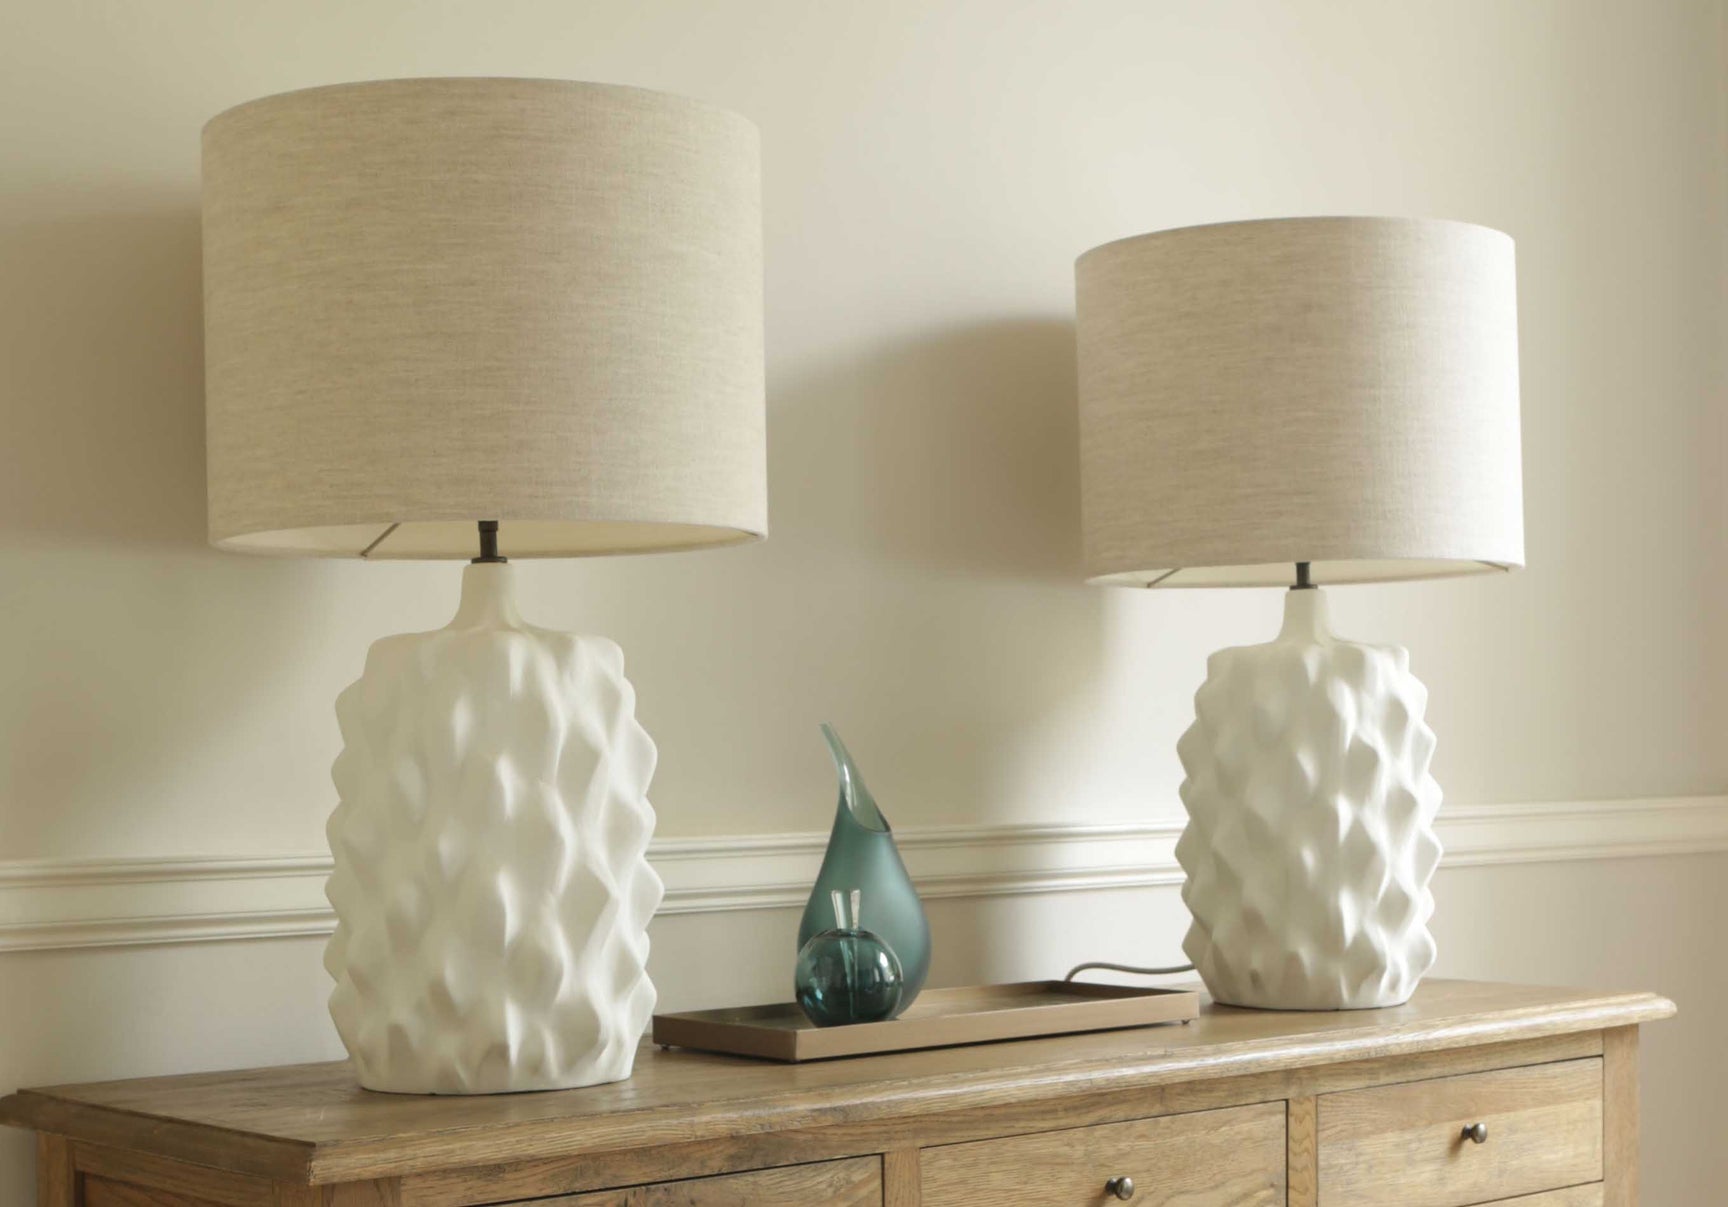 Porta Romana Baobab Lamp featured in Woodhouse and Law's Interior